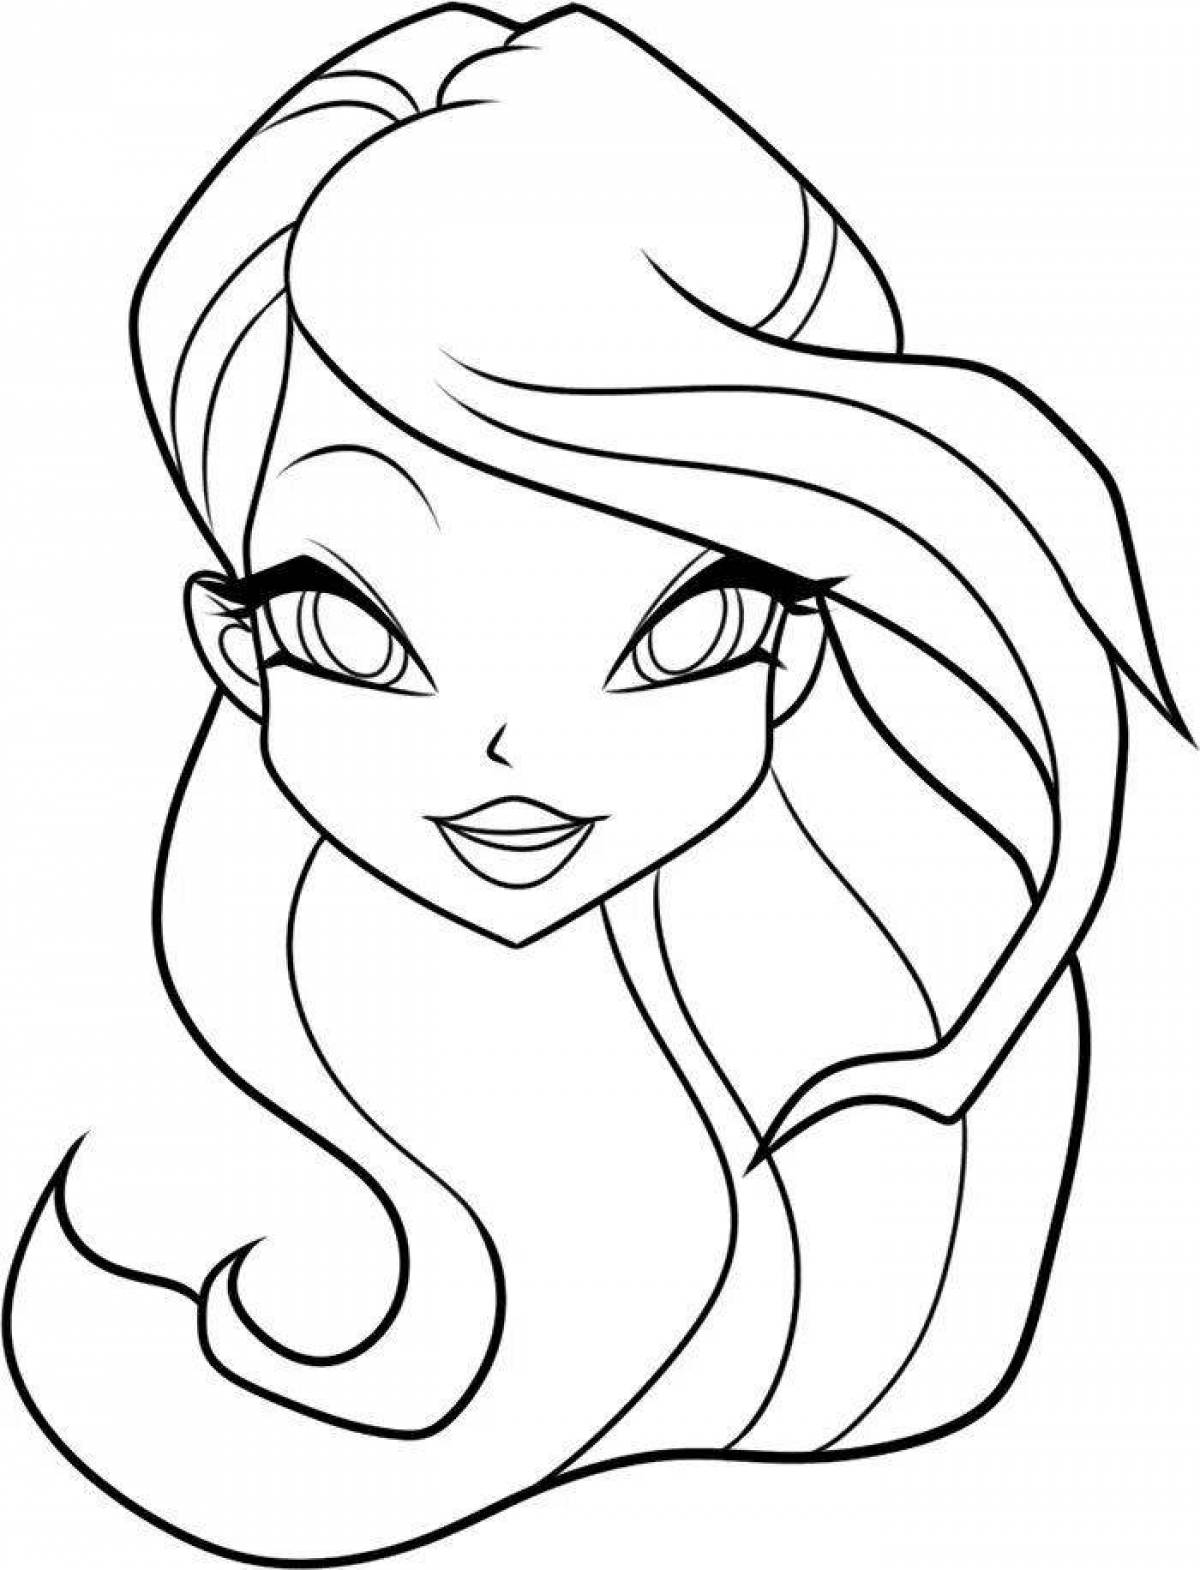 Fun coloring pages to draw